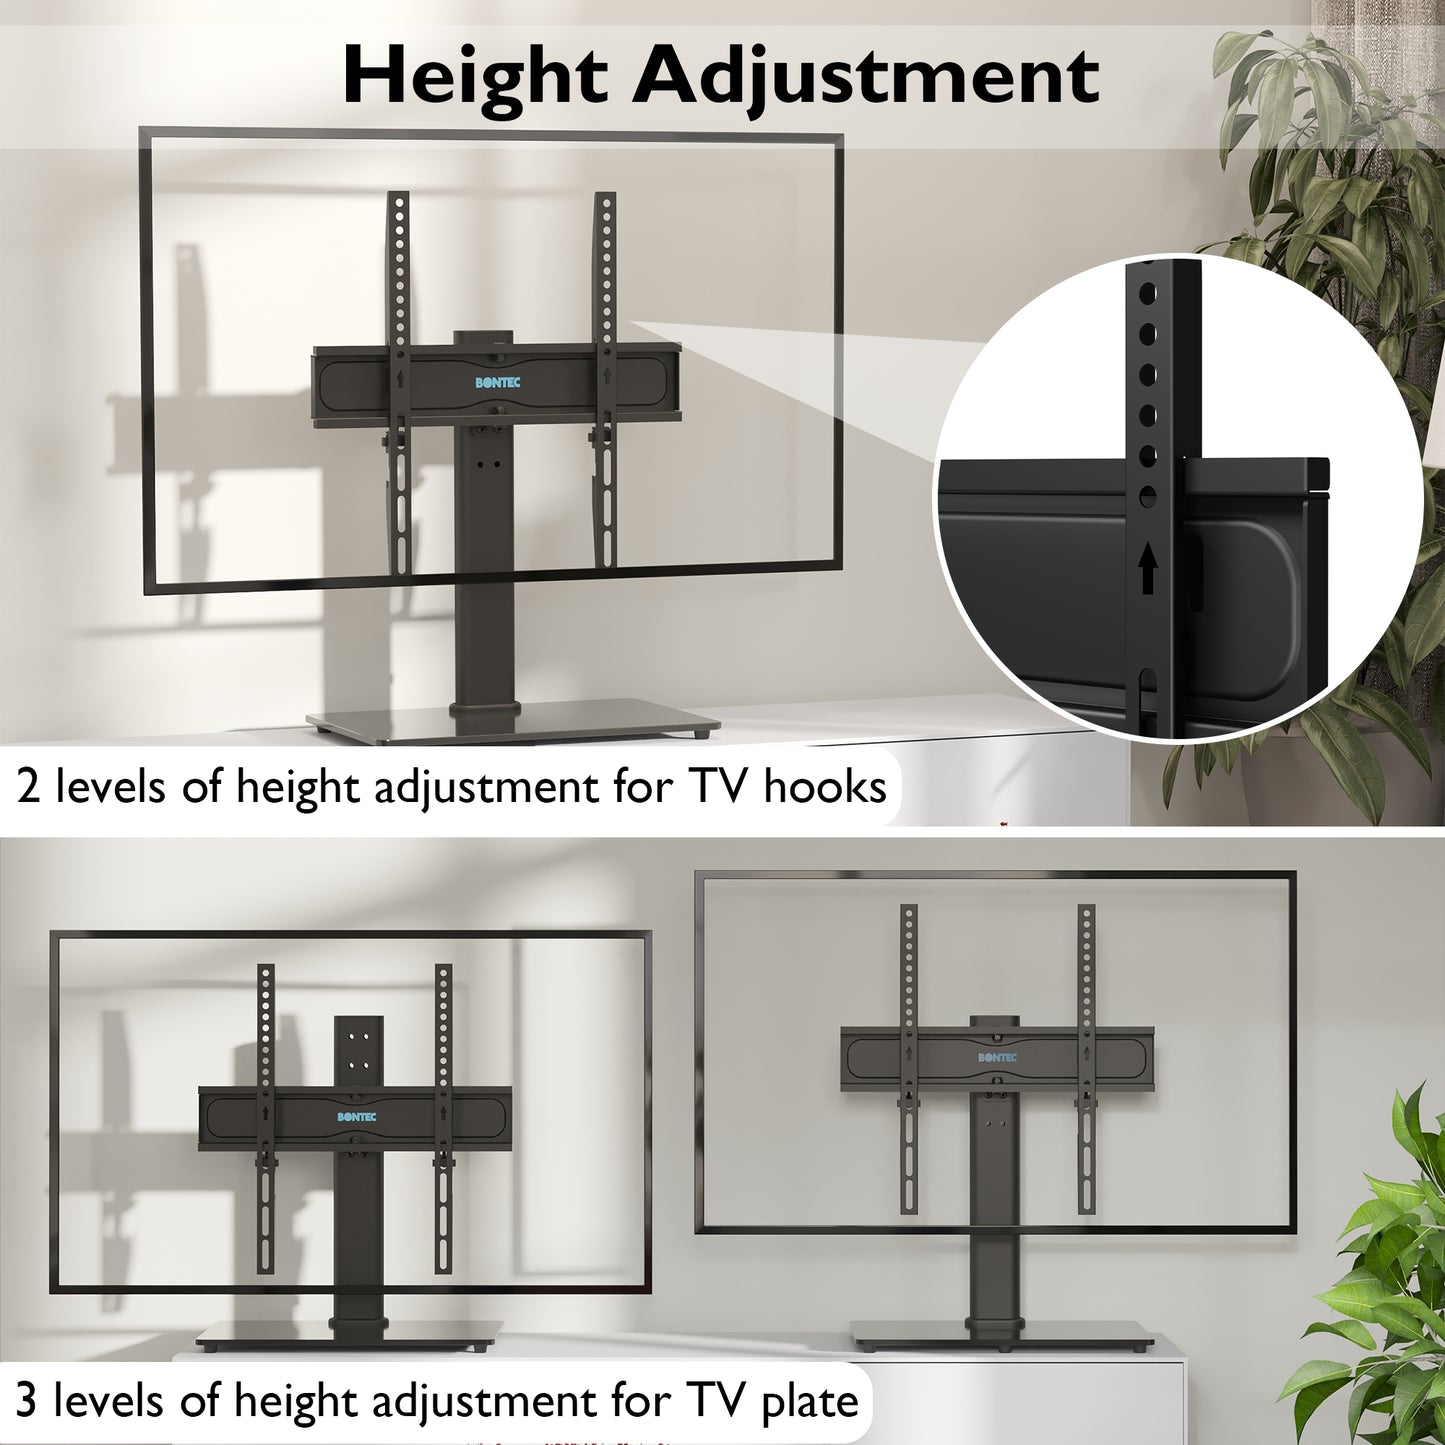 BONTEC Swivel Table Top TV Stand with Bracket for 26-55 inch LED OLED LCD Plasma Flat Curved Screens Height Adjustable TV stand with Tempered Glass Base Max. VESA 400x400mm up to 45KG